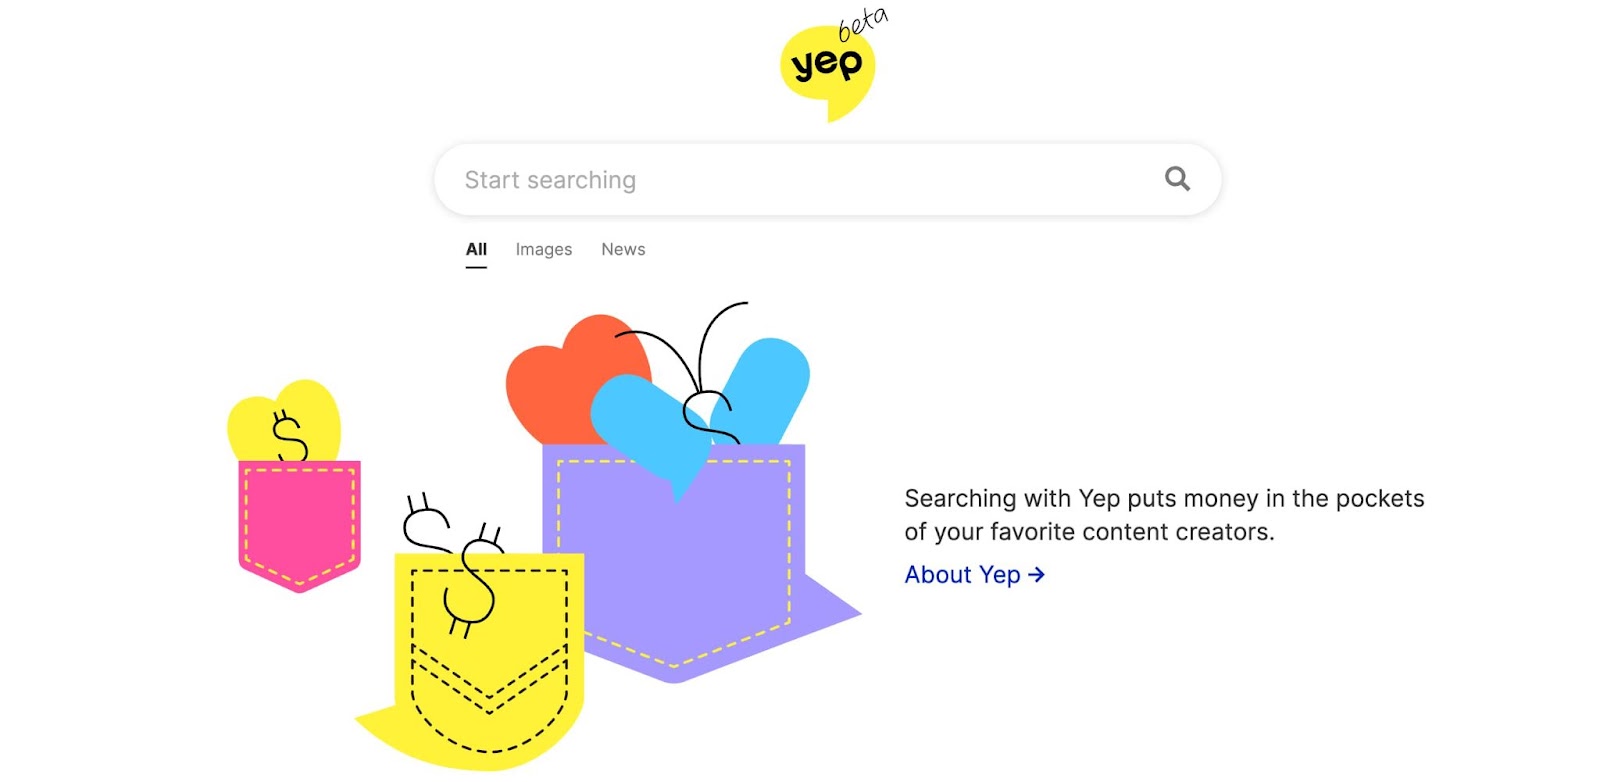 Yep landing page. “Searching with Yep puts money in the pockets of your favorite creators.”